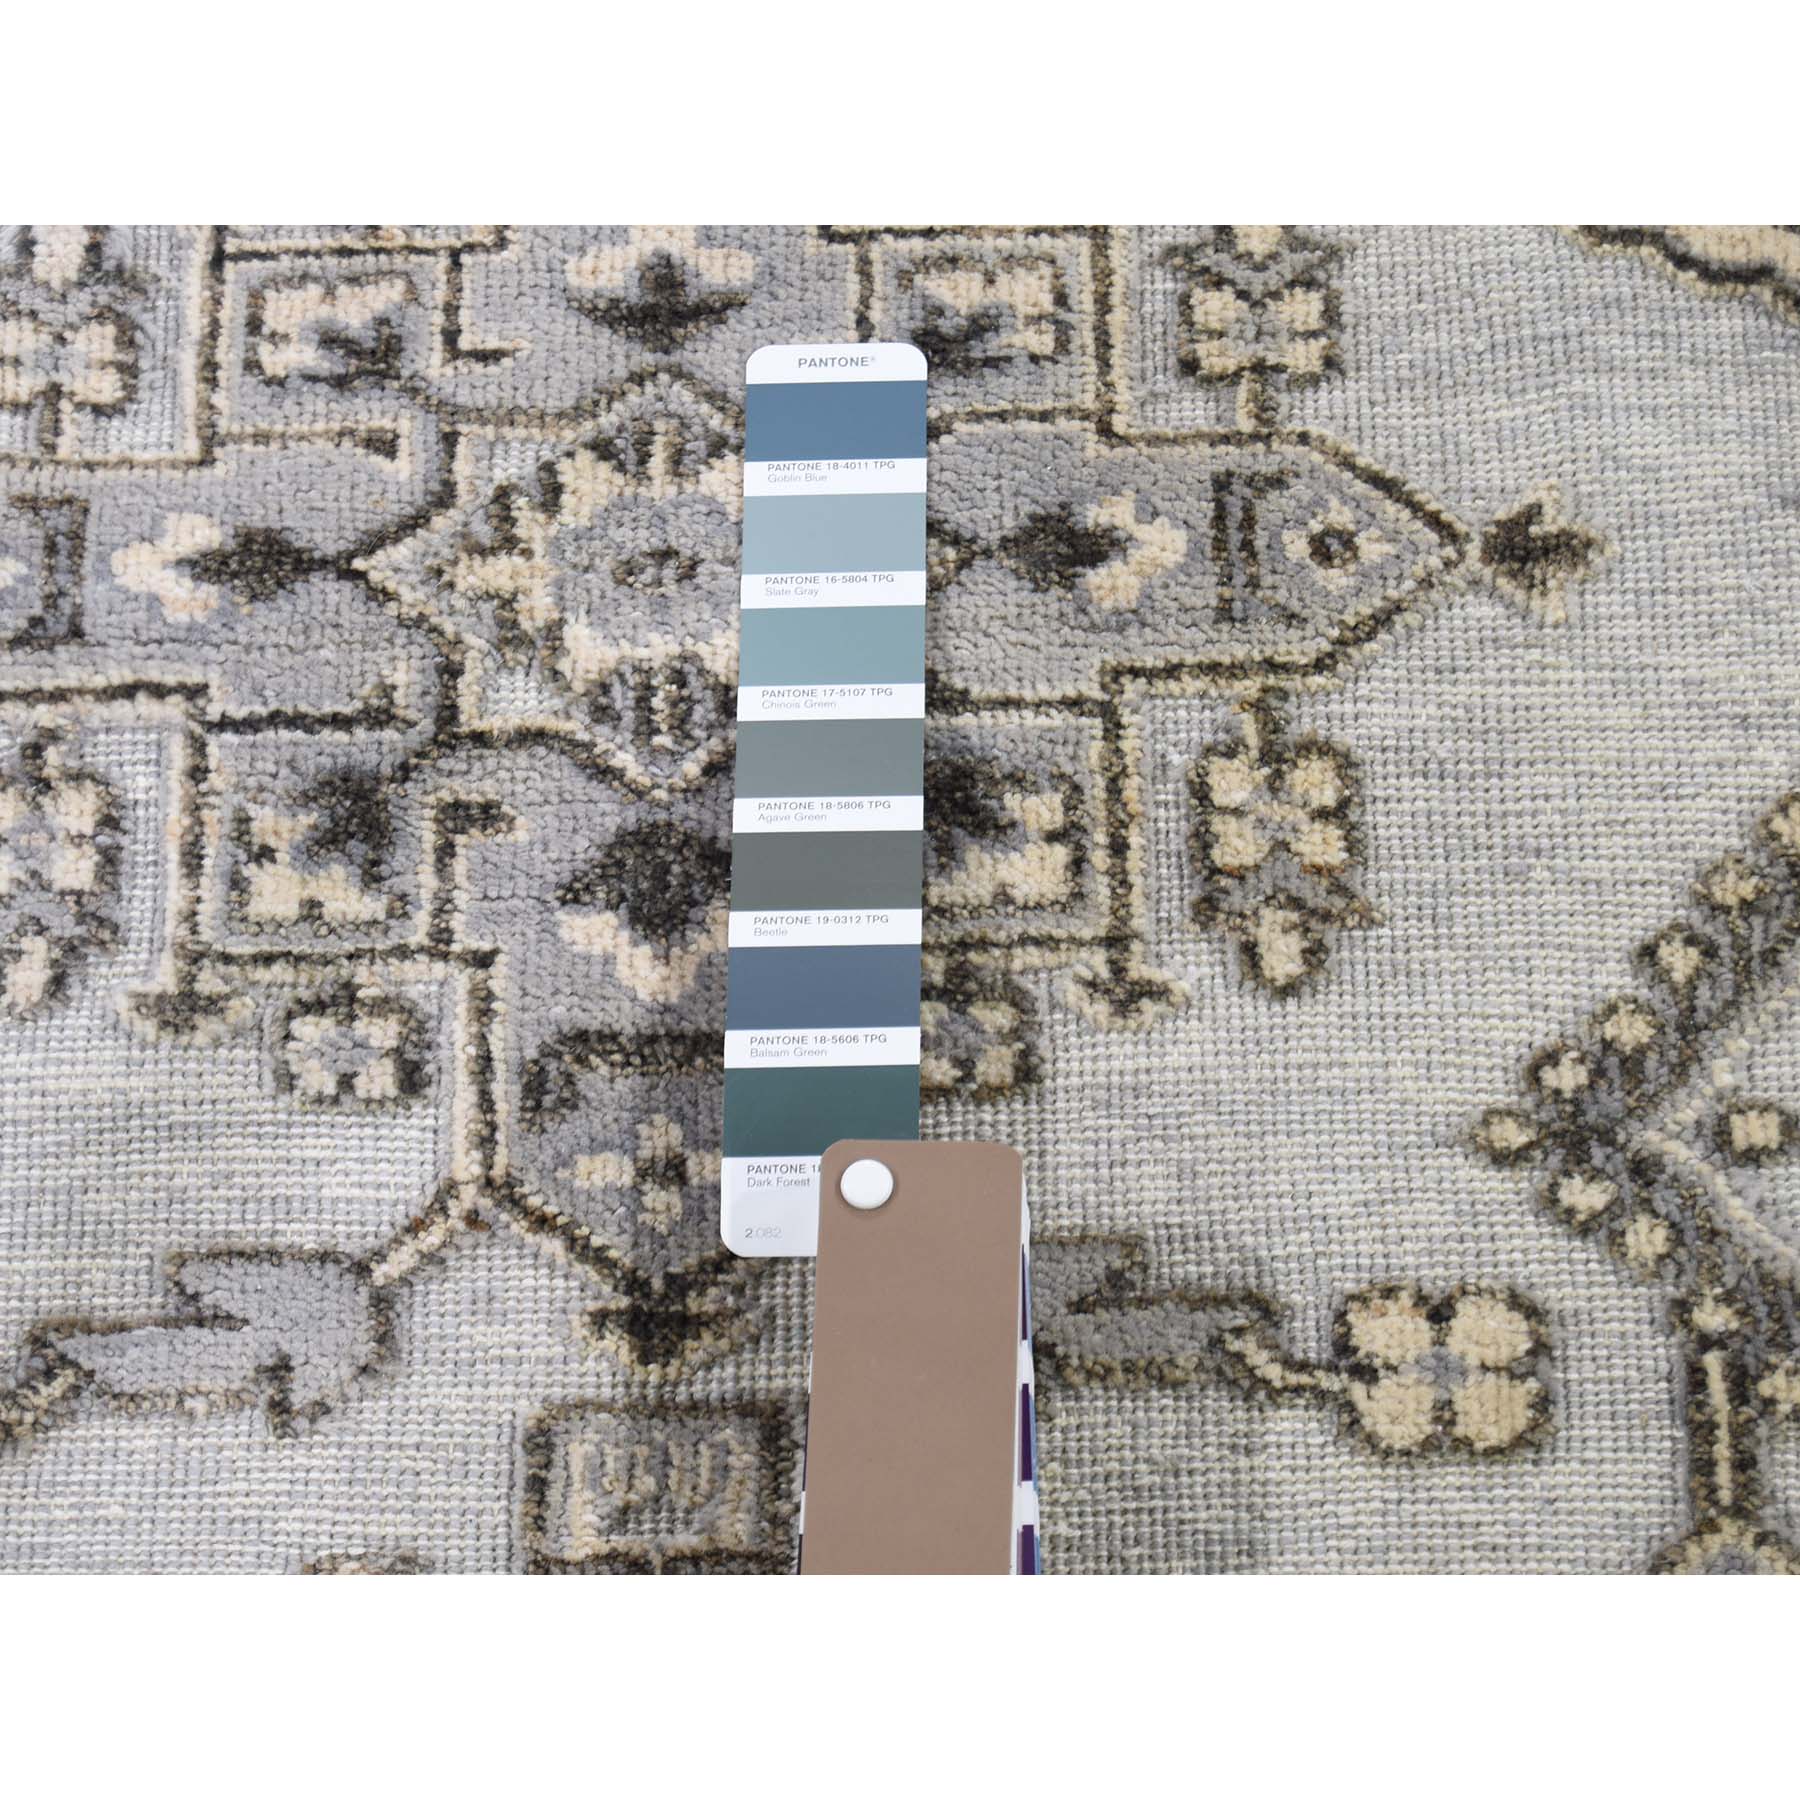 8-x9-10  Textured Pile With Textured Wool Hi-Low Peshawar Hand-Knotted Oriental Rug 